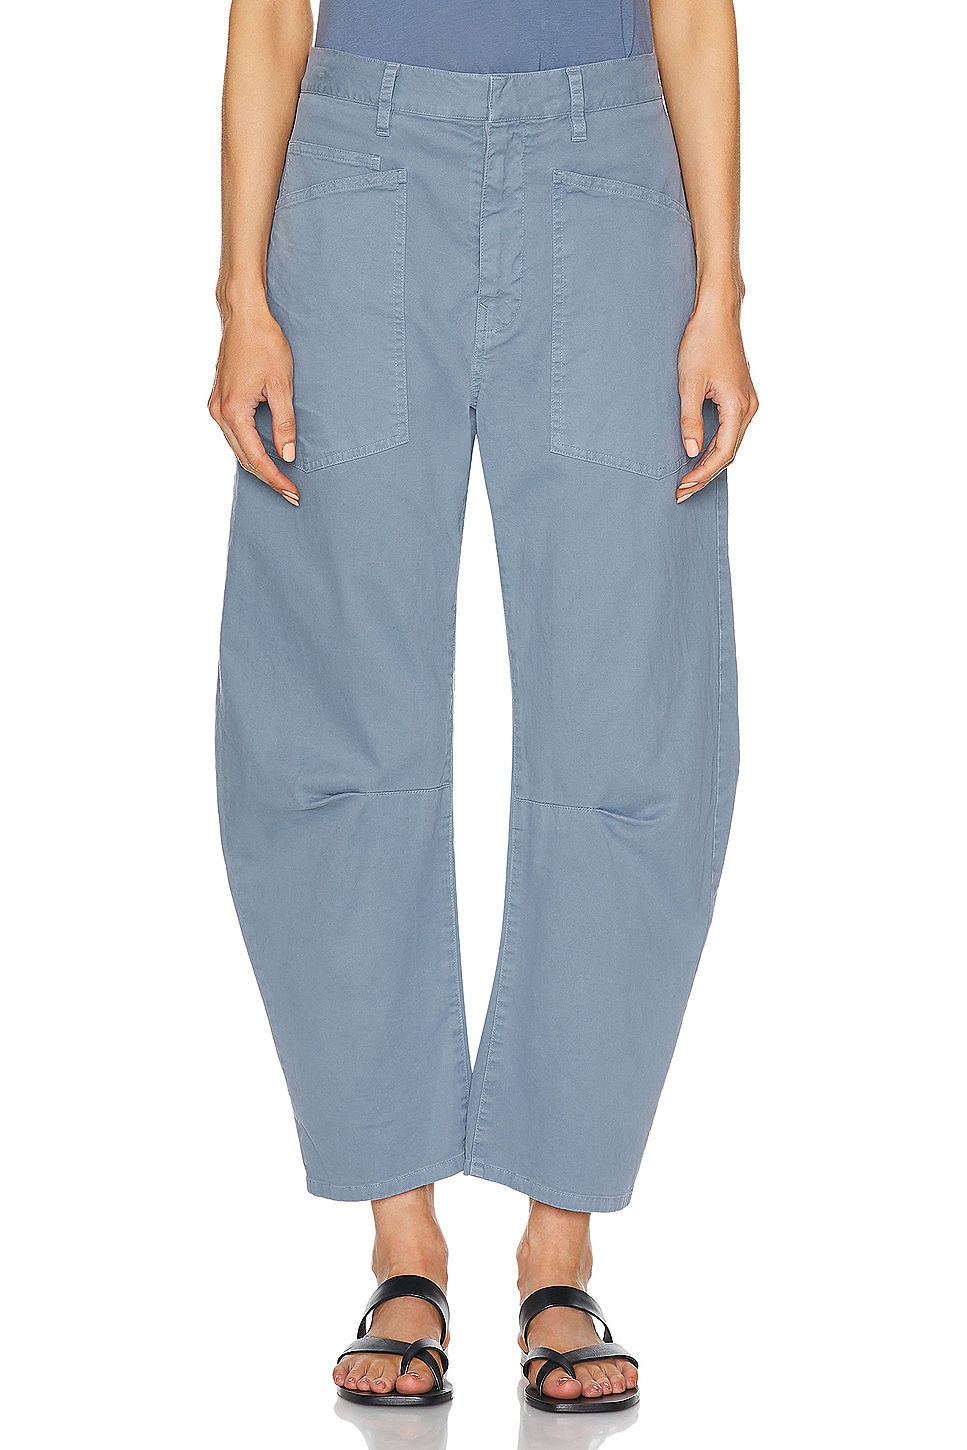 Shon Pant in Blue